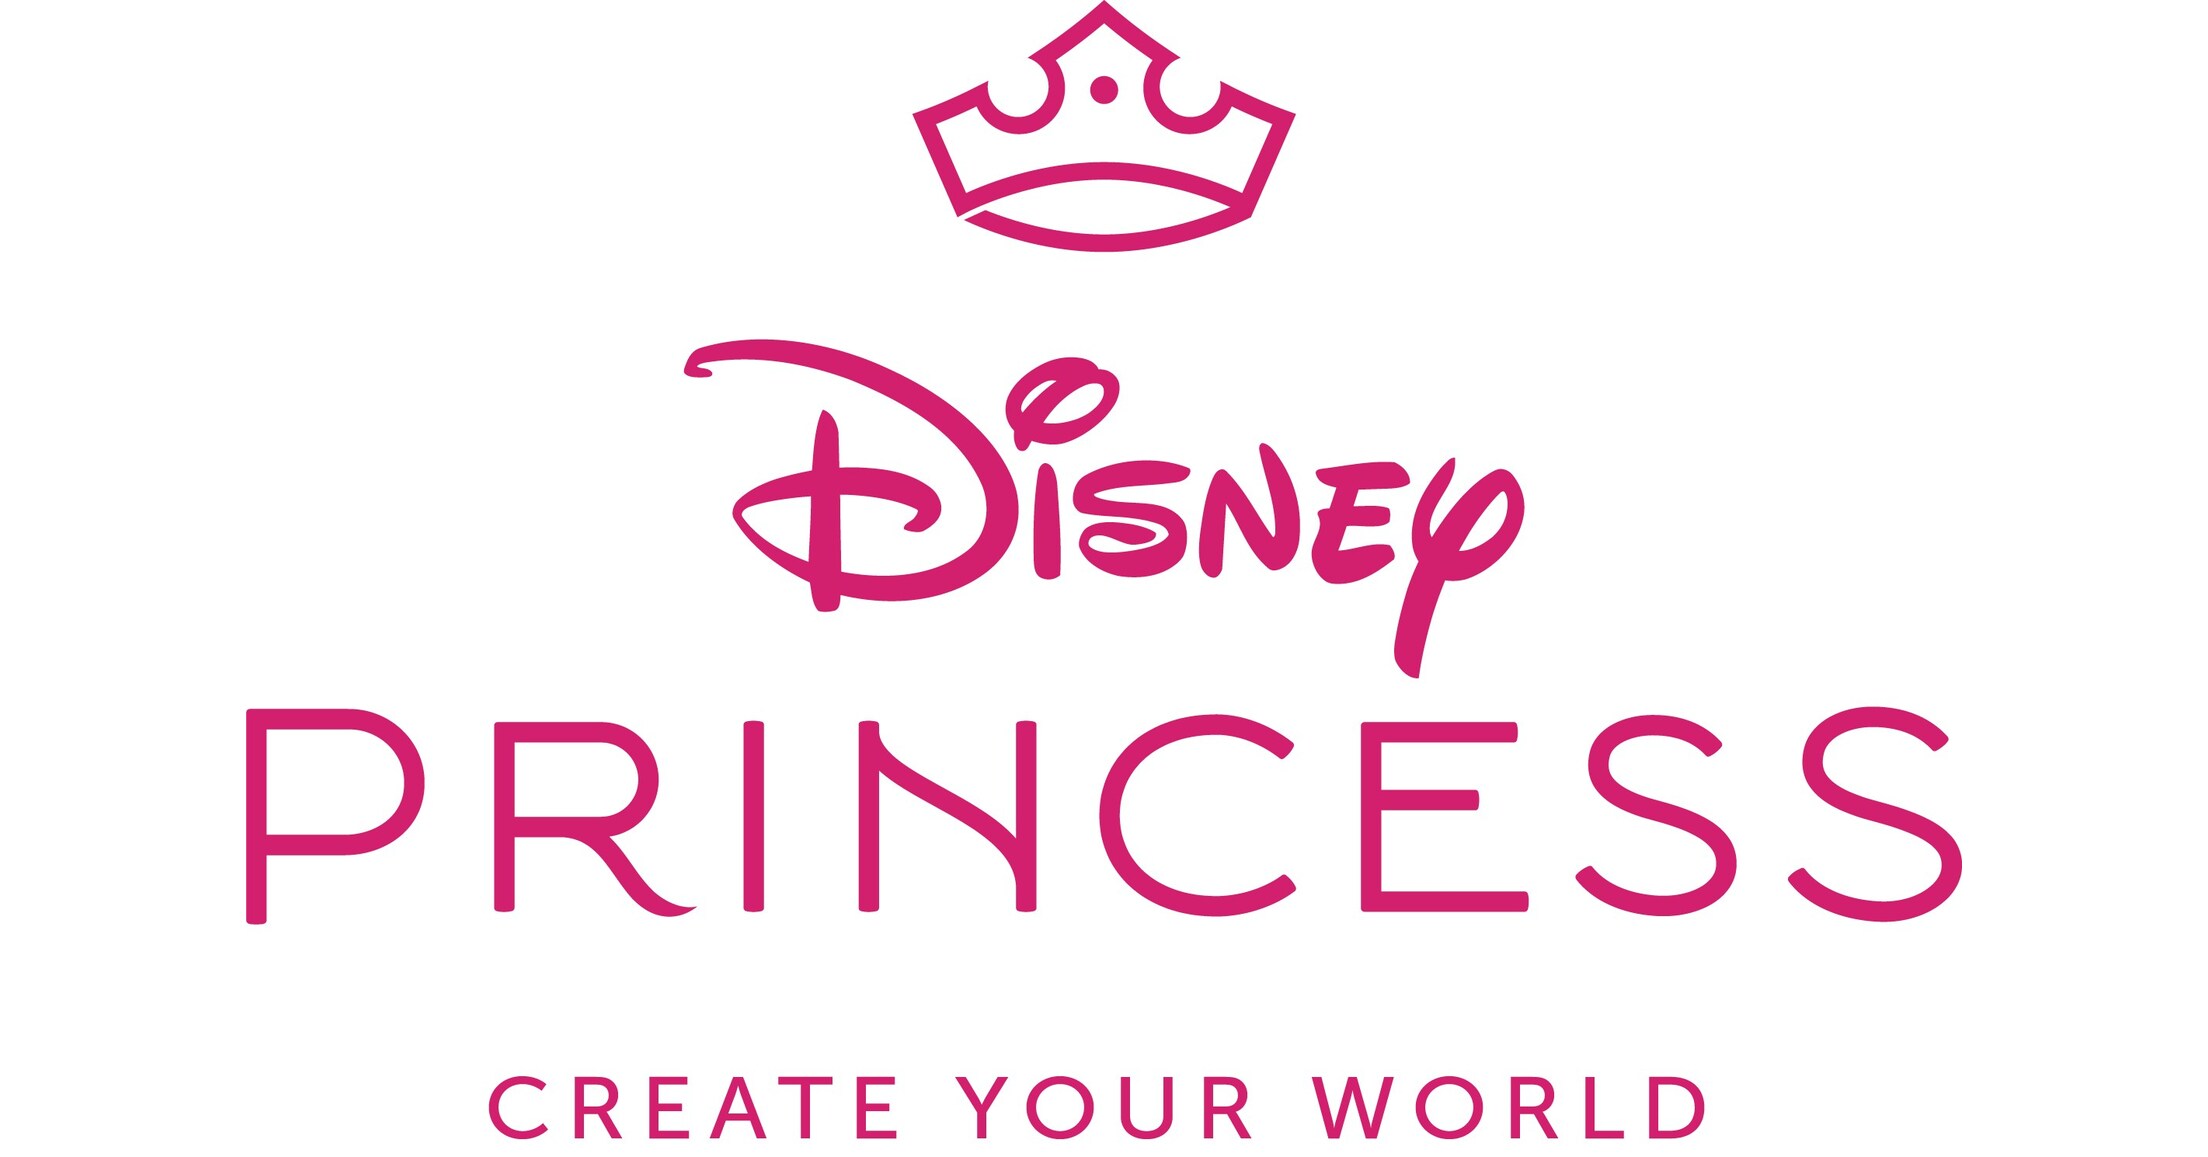 Beloved Disney Princesses Come Together to Inspire Girls to “Create Your World” Through New Multi-Year Brand Campaign